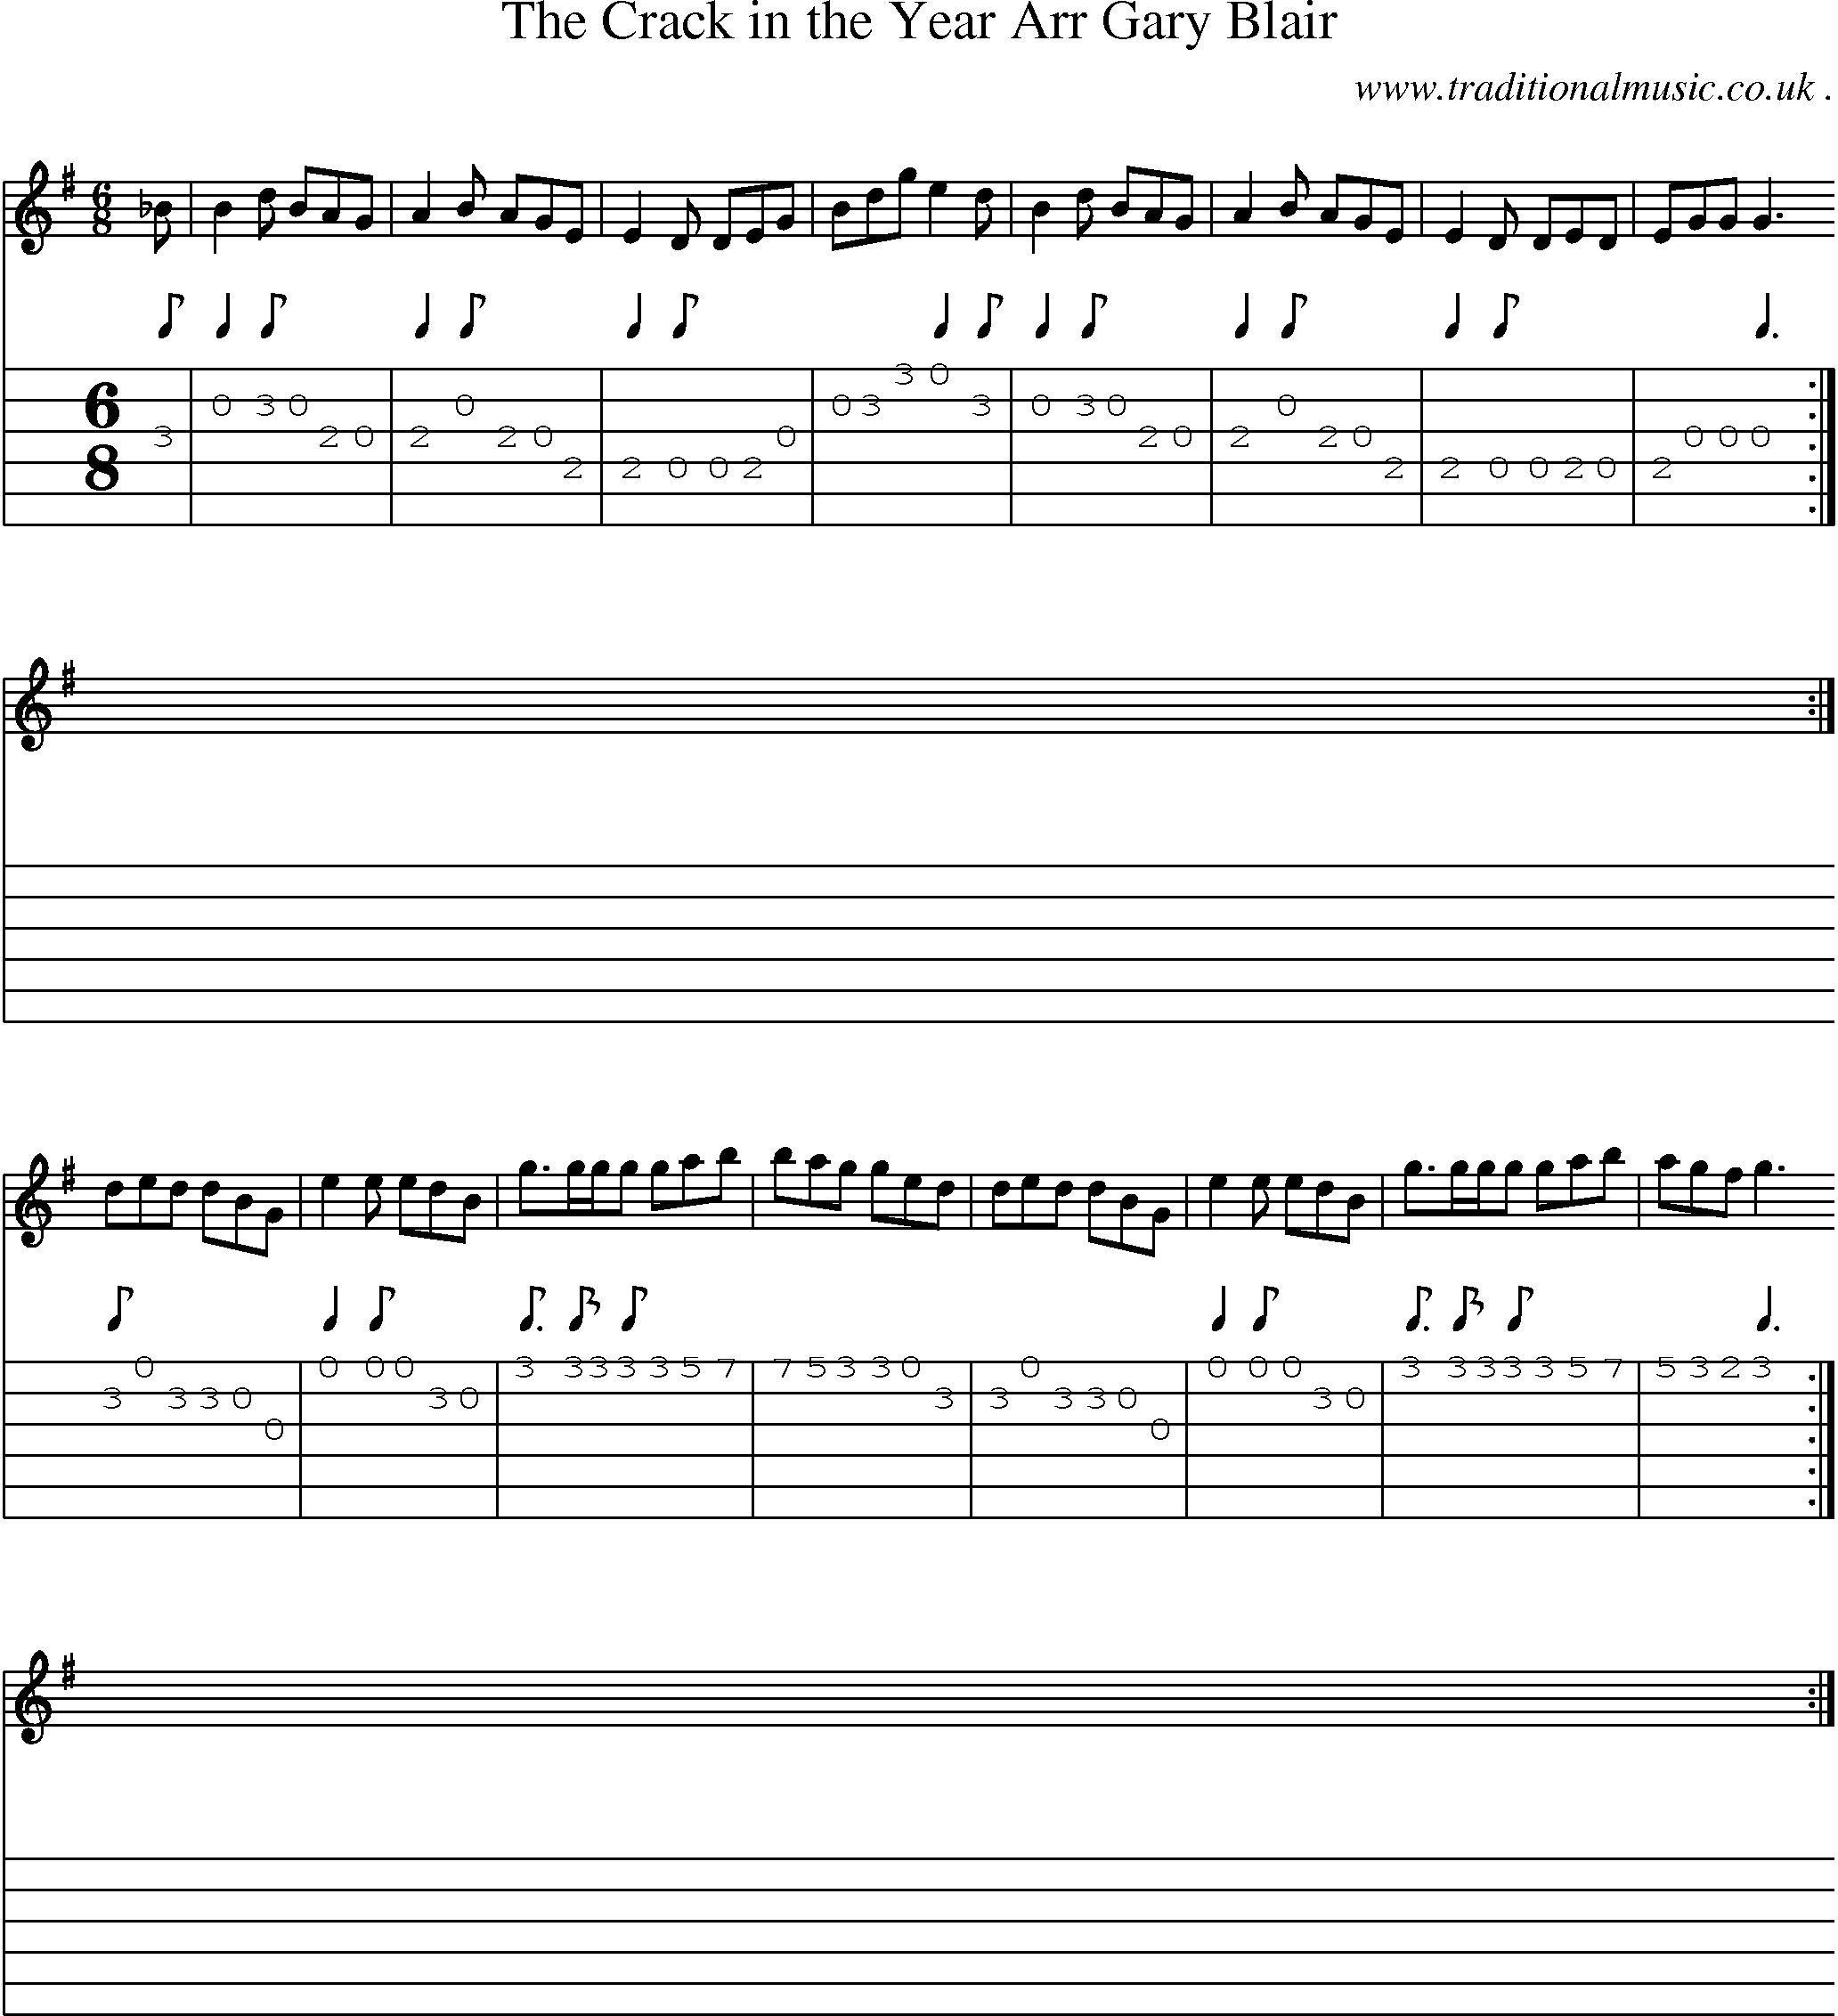 Sheet-Music and Guitar Tabs for The Crack In The Year Arr Gary Blair